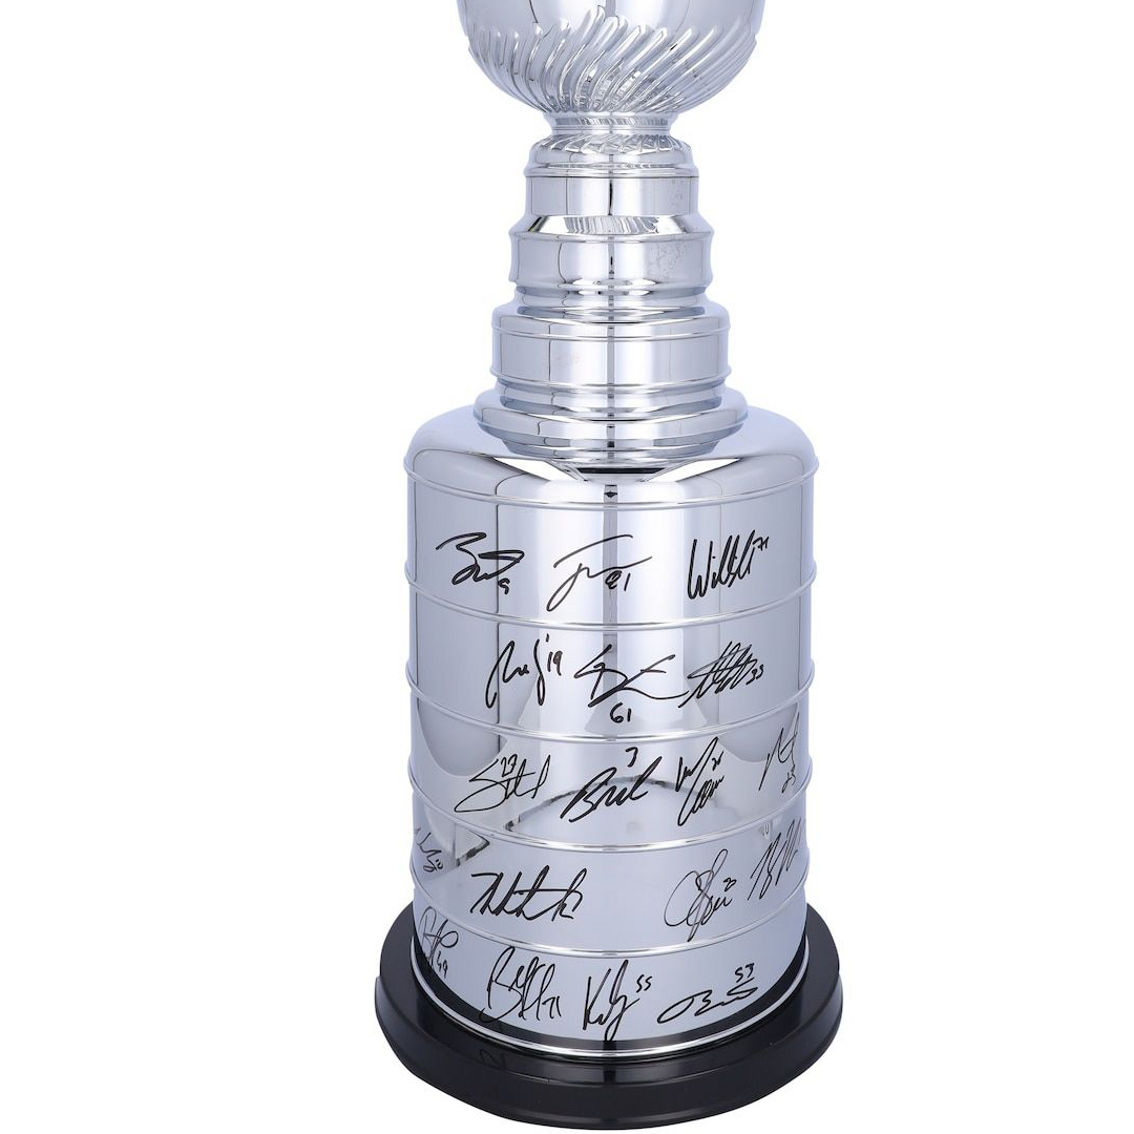 Fanatics Authentic Vegas Golden Knights Multi-Signed 2023 Stanley Cup s 2' Replica Stanley Cup with Multiple Signatures - Limited Edition of 75 - Image 2 of 4